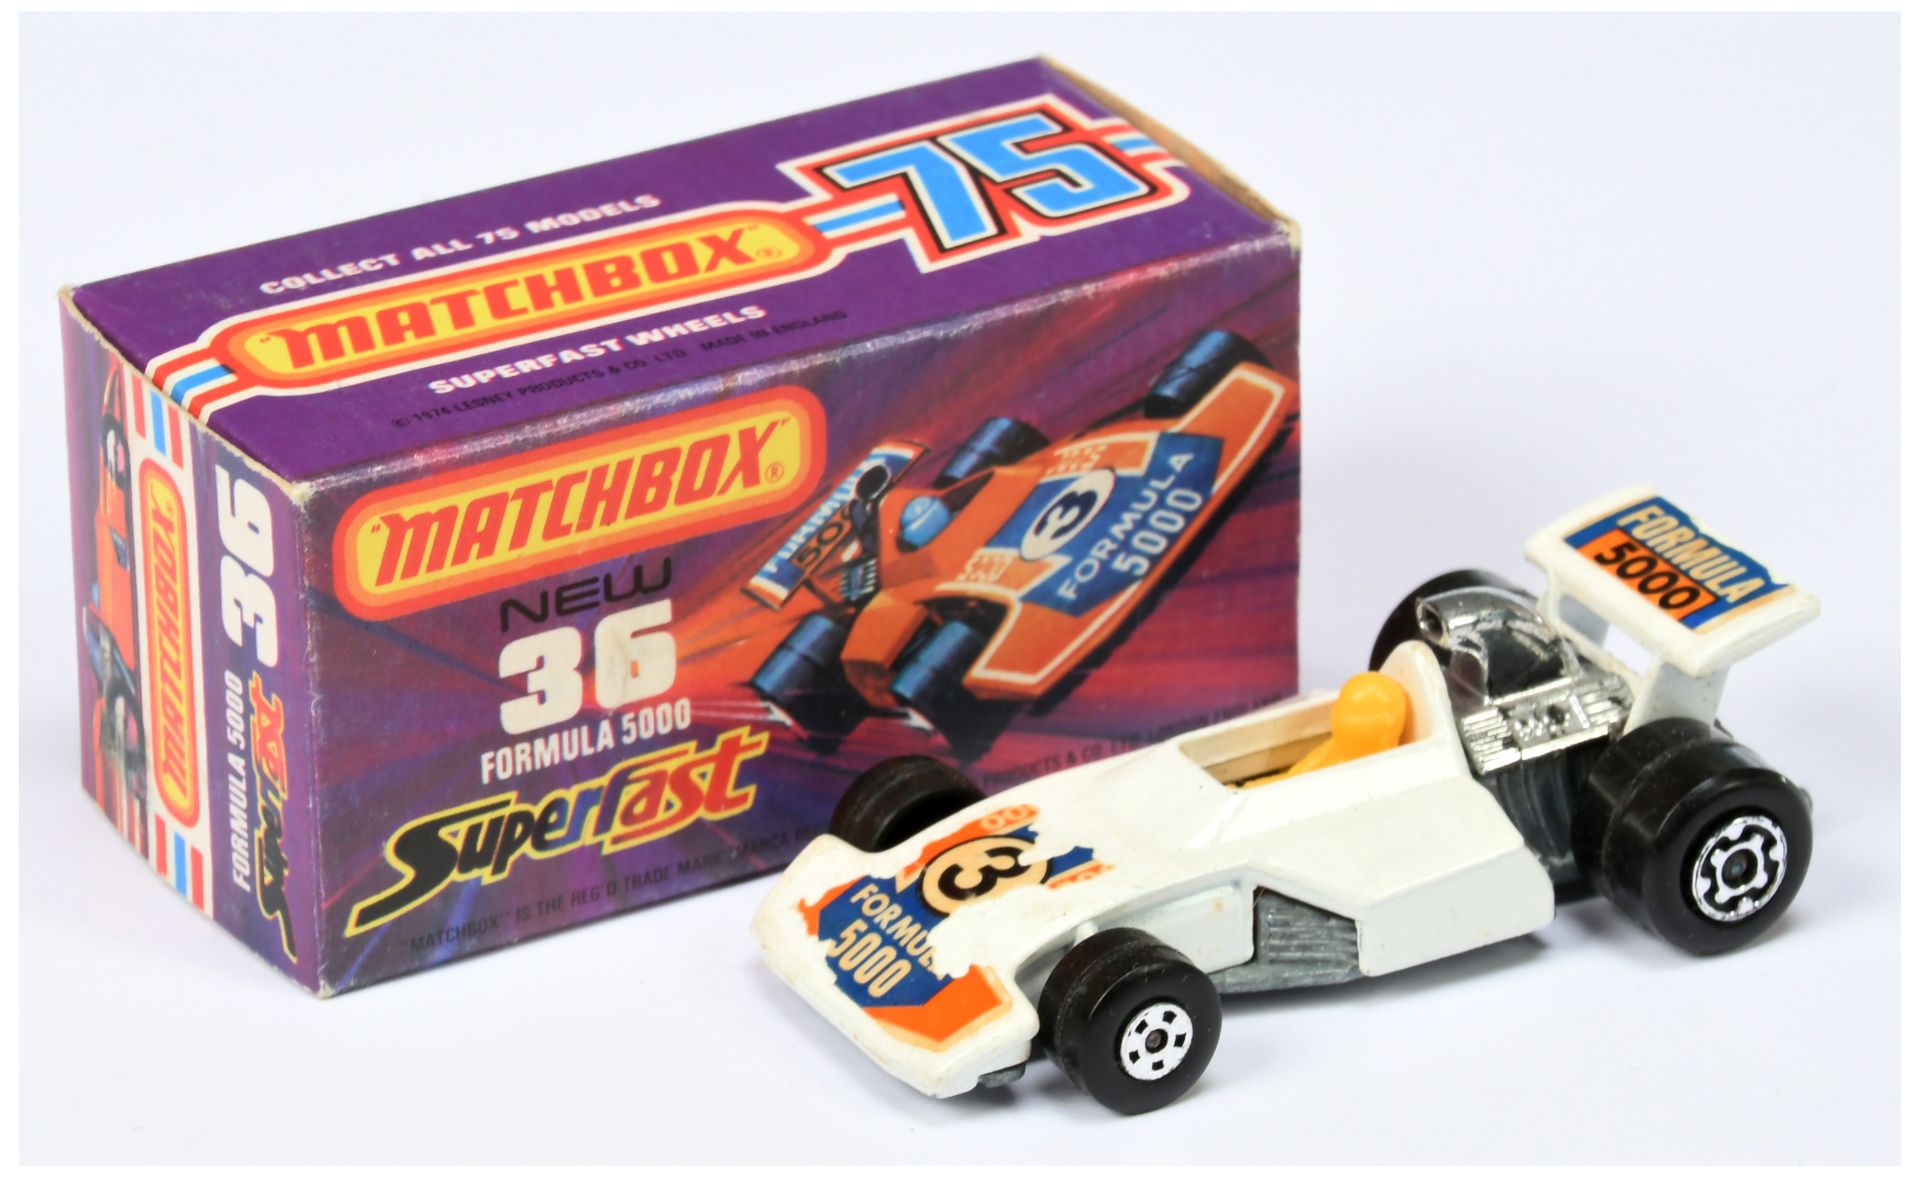 Matchbox Superfast 36c Formula 5000 Racing Car MADE IN BRAZIL ISSUE